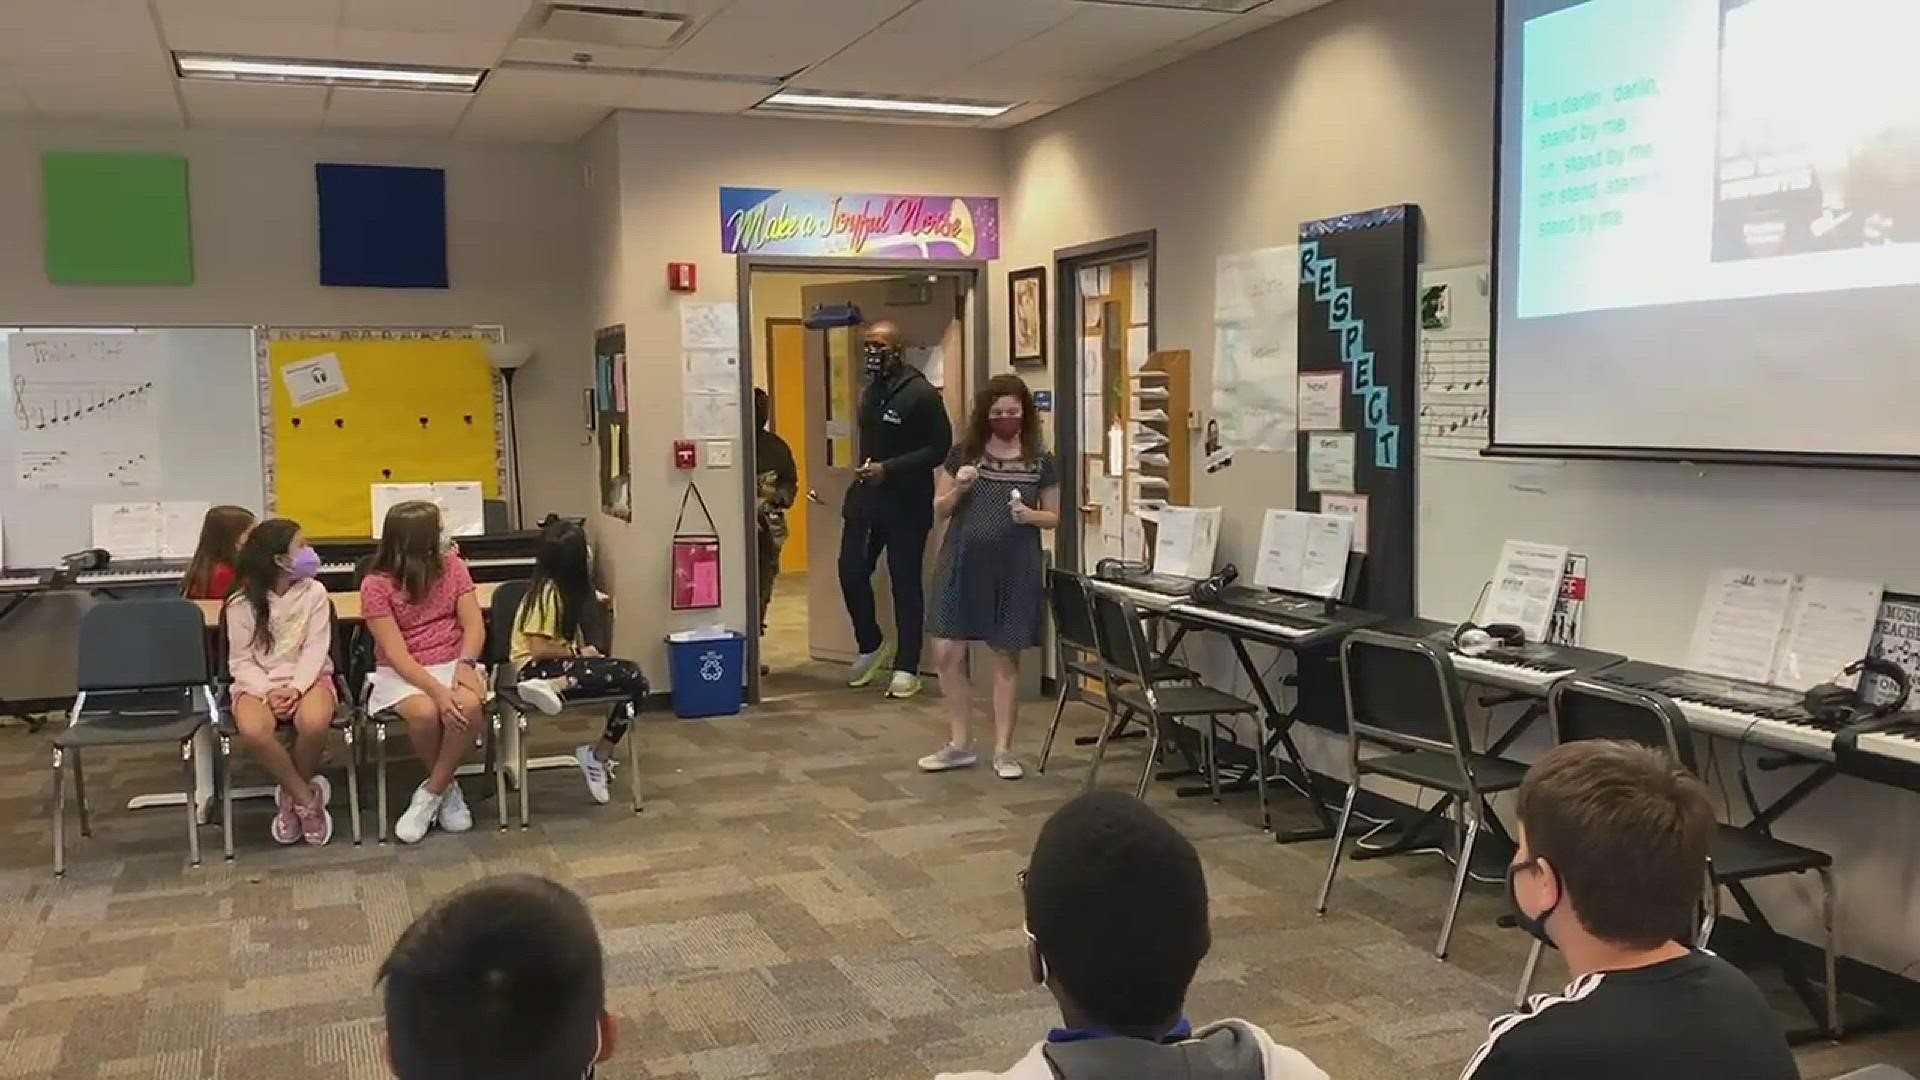 After spending the last year in Kuwait, a mom surprised her daughter during class at Fall Creek Intermediate School in Fishers.